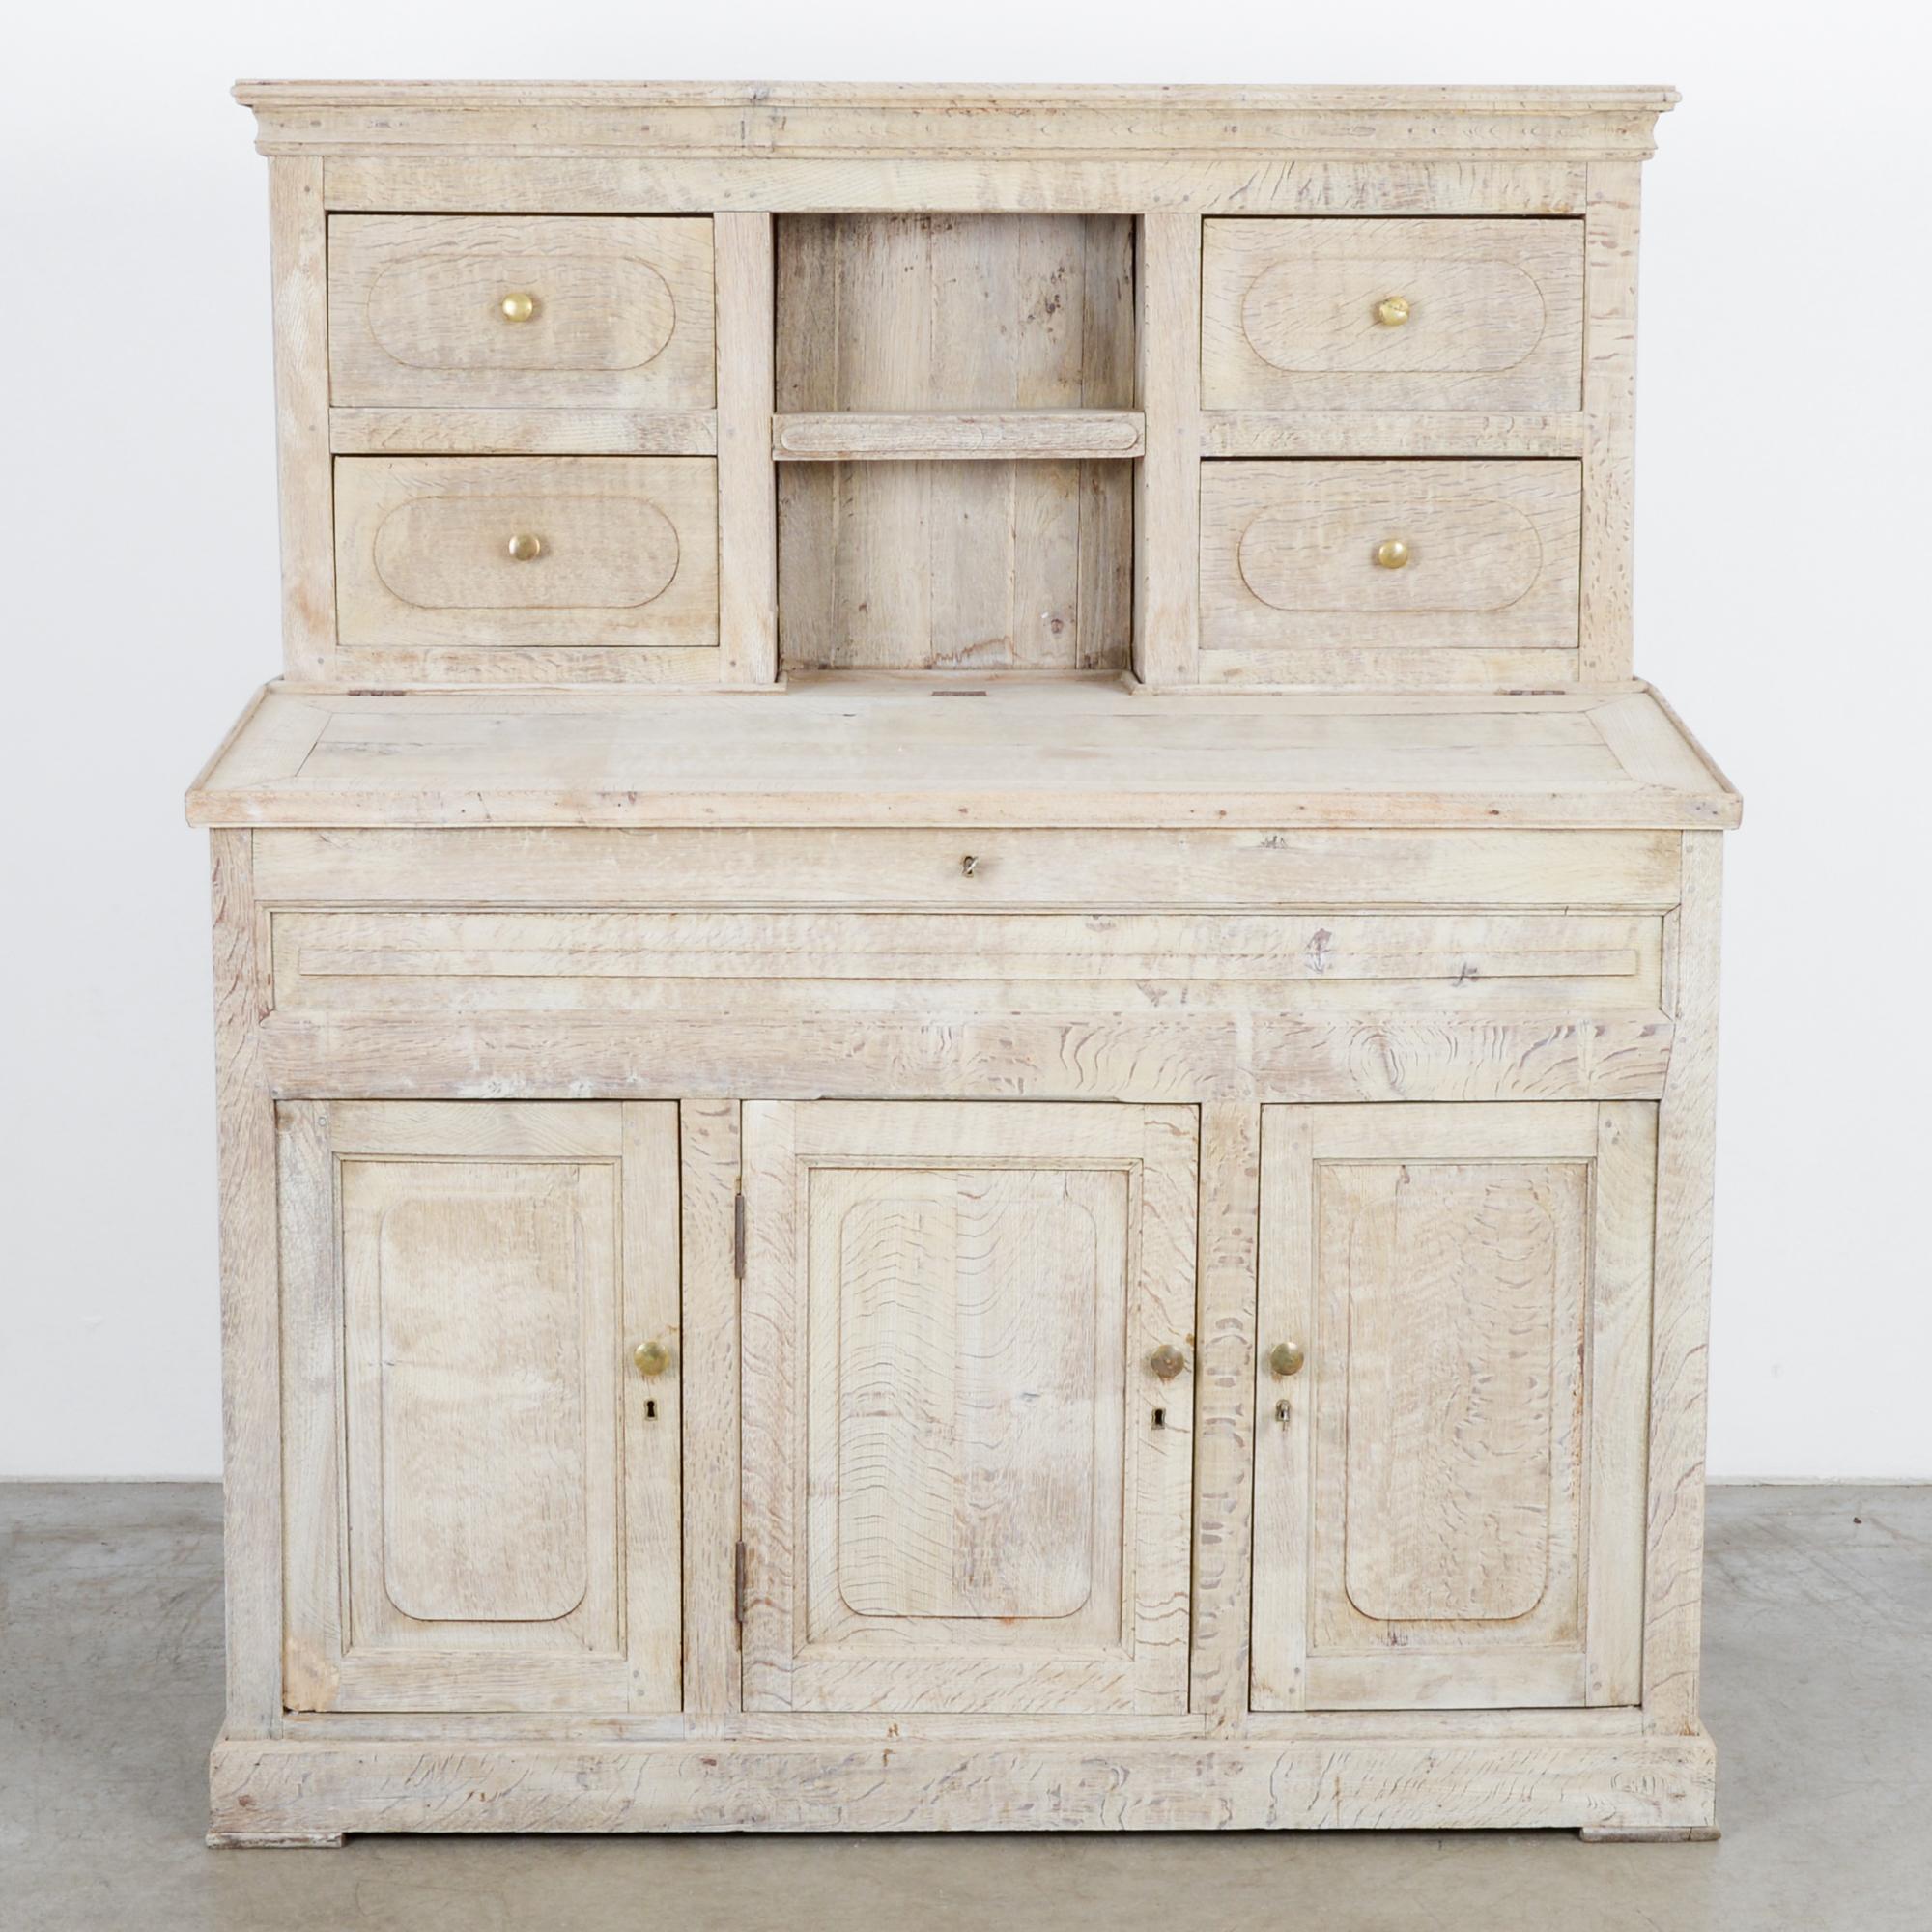 This oak secretary cabinet was made in Belgium, circa 1880. The top section features four drawers and shelves in the middle. Additional shelves at the bottom provide additional storage space. The impressive workmanship can be seen in the sturdy